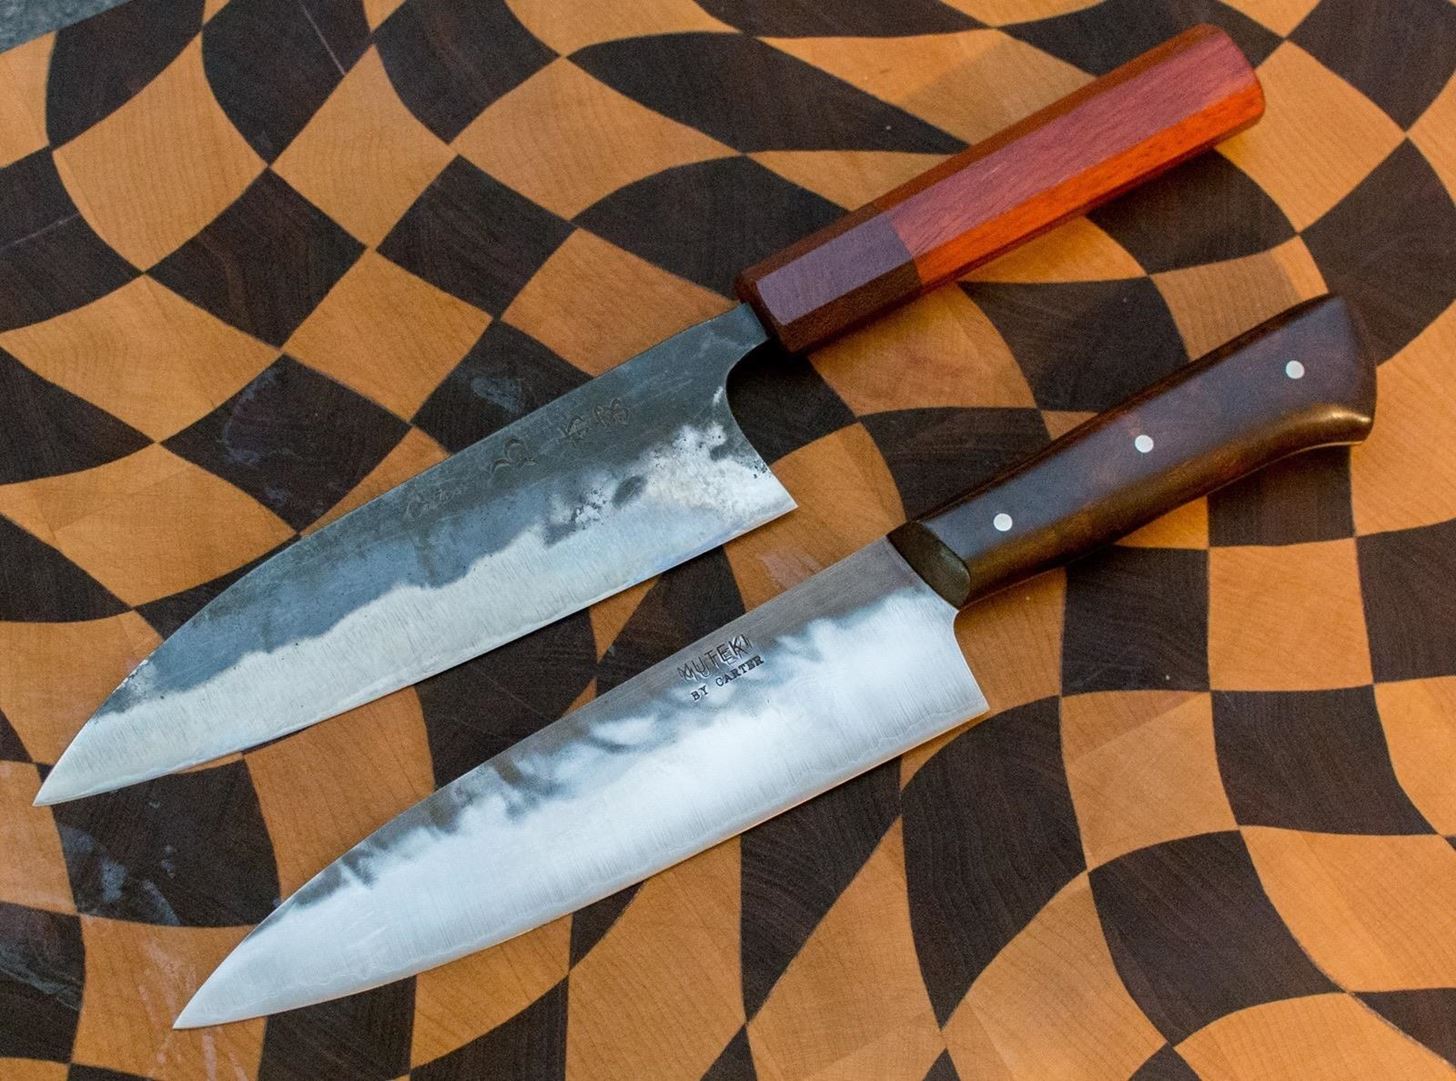 Food Tool Friday: Why Pros Use Carbon Steel Knives